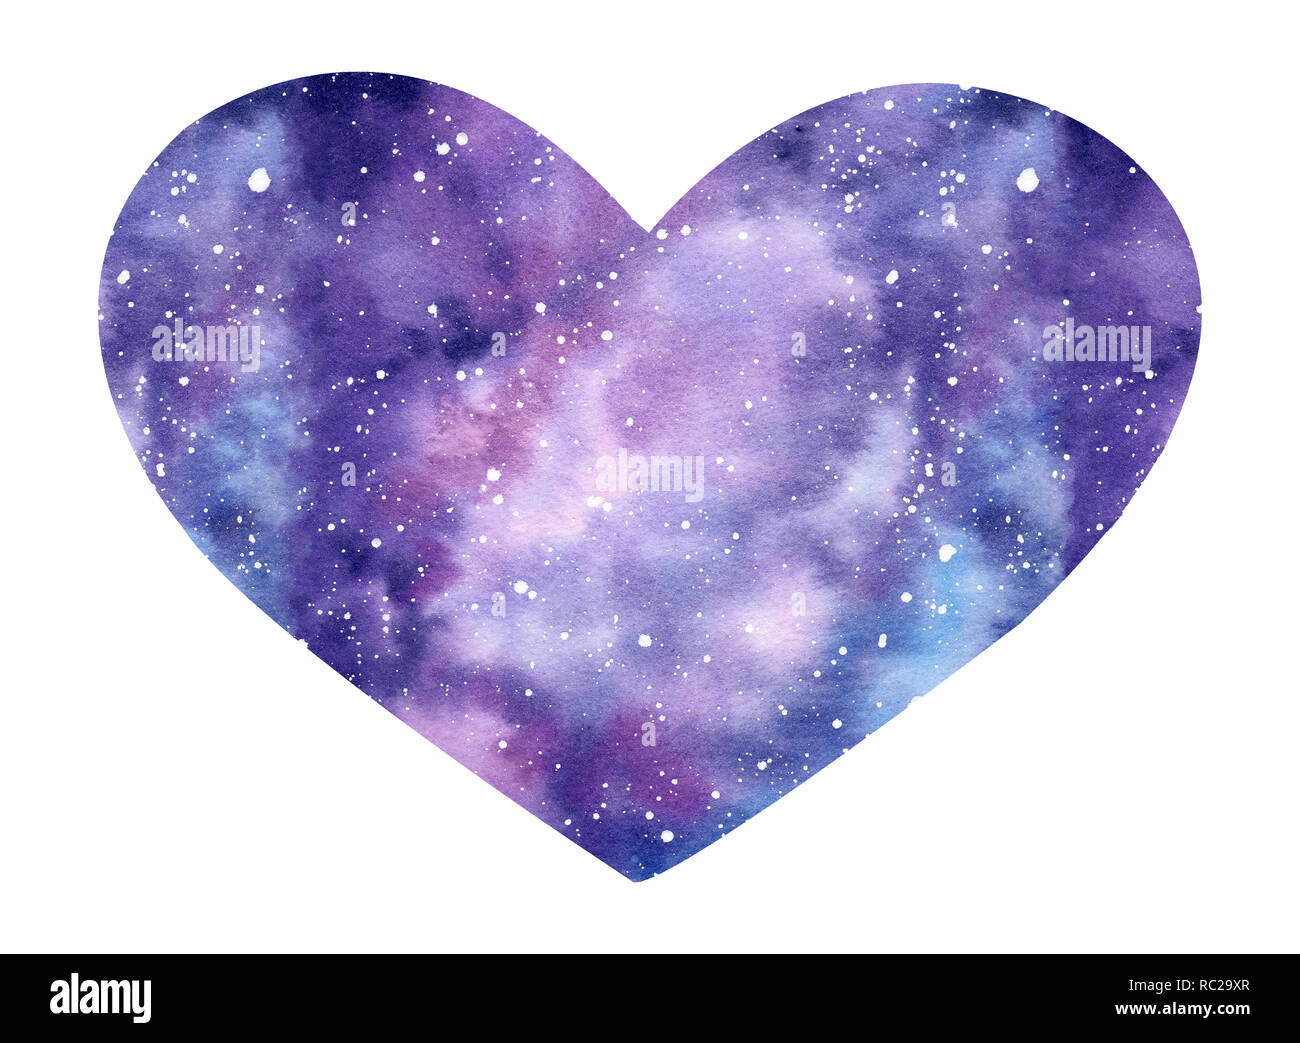 Hand painted watercolor galaxy illustration in shape of a heart isolated on the white background. Isolated objects perfect for Valentine's day invitat Stock Photo